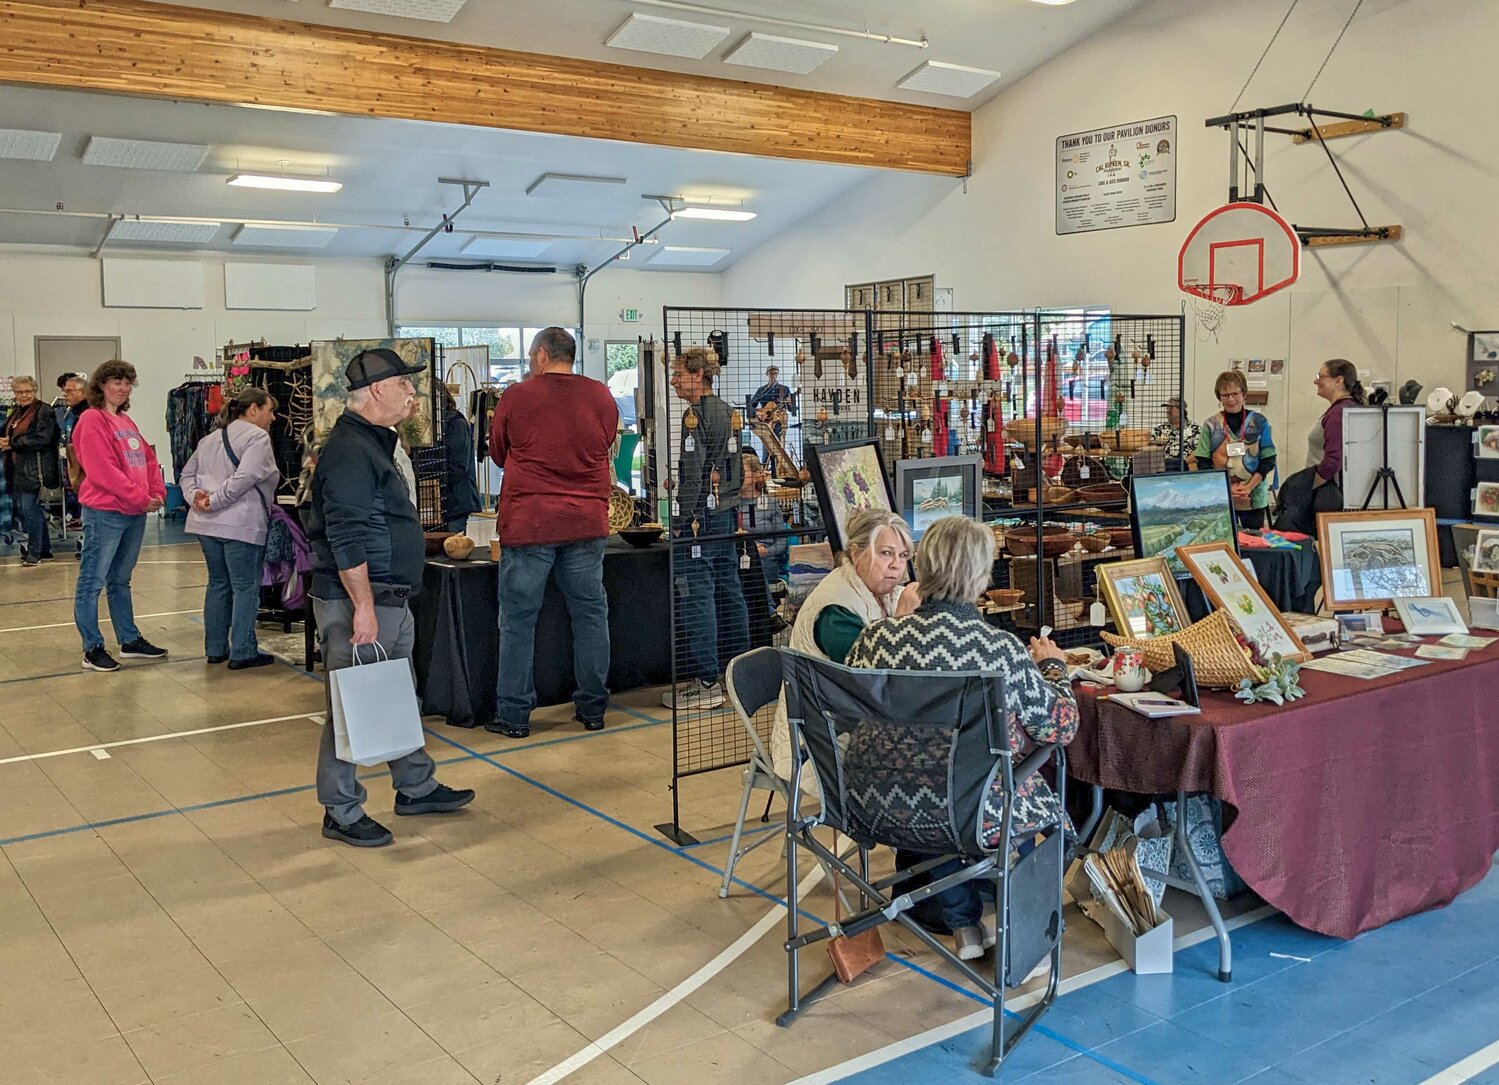 Blaine Arts Council hosted the Sea to See art showcase and sale at the Blaine Community Center Pavilion on November 4. The event, which was the organization’s first pop-up show, had about 20 Whatcom County artists on display as well as live music and food vendors.